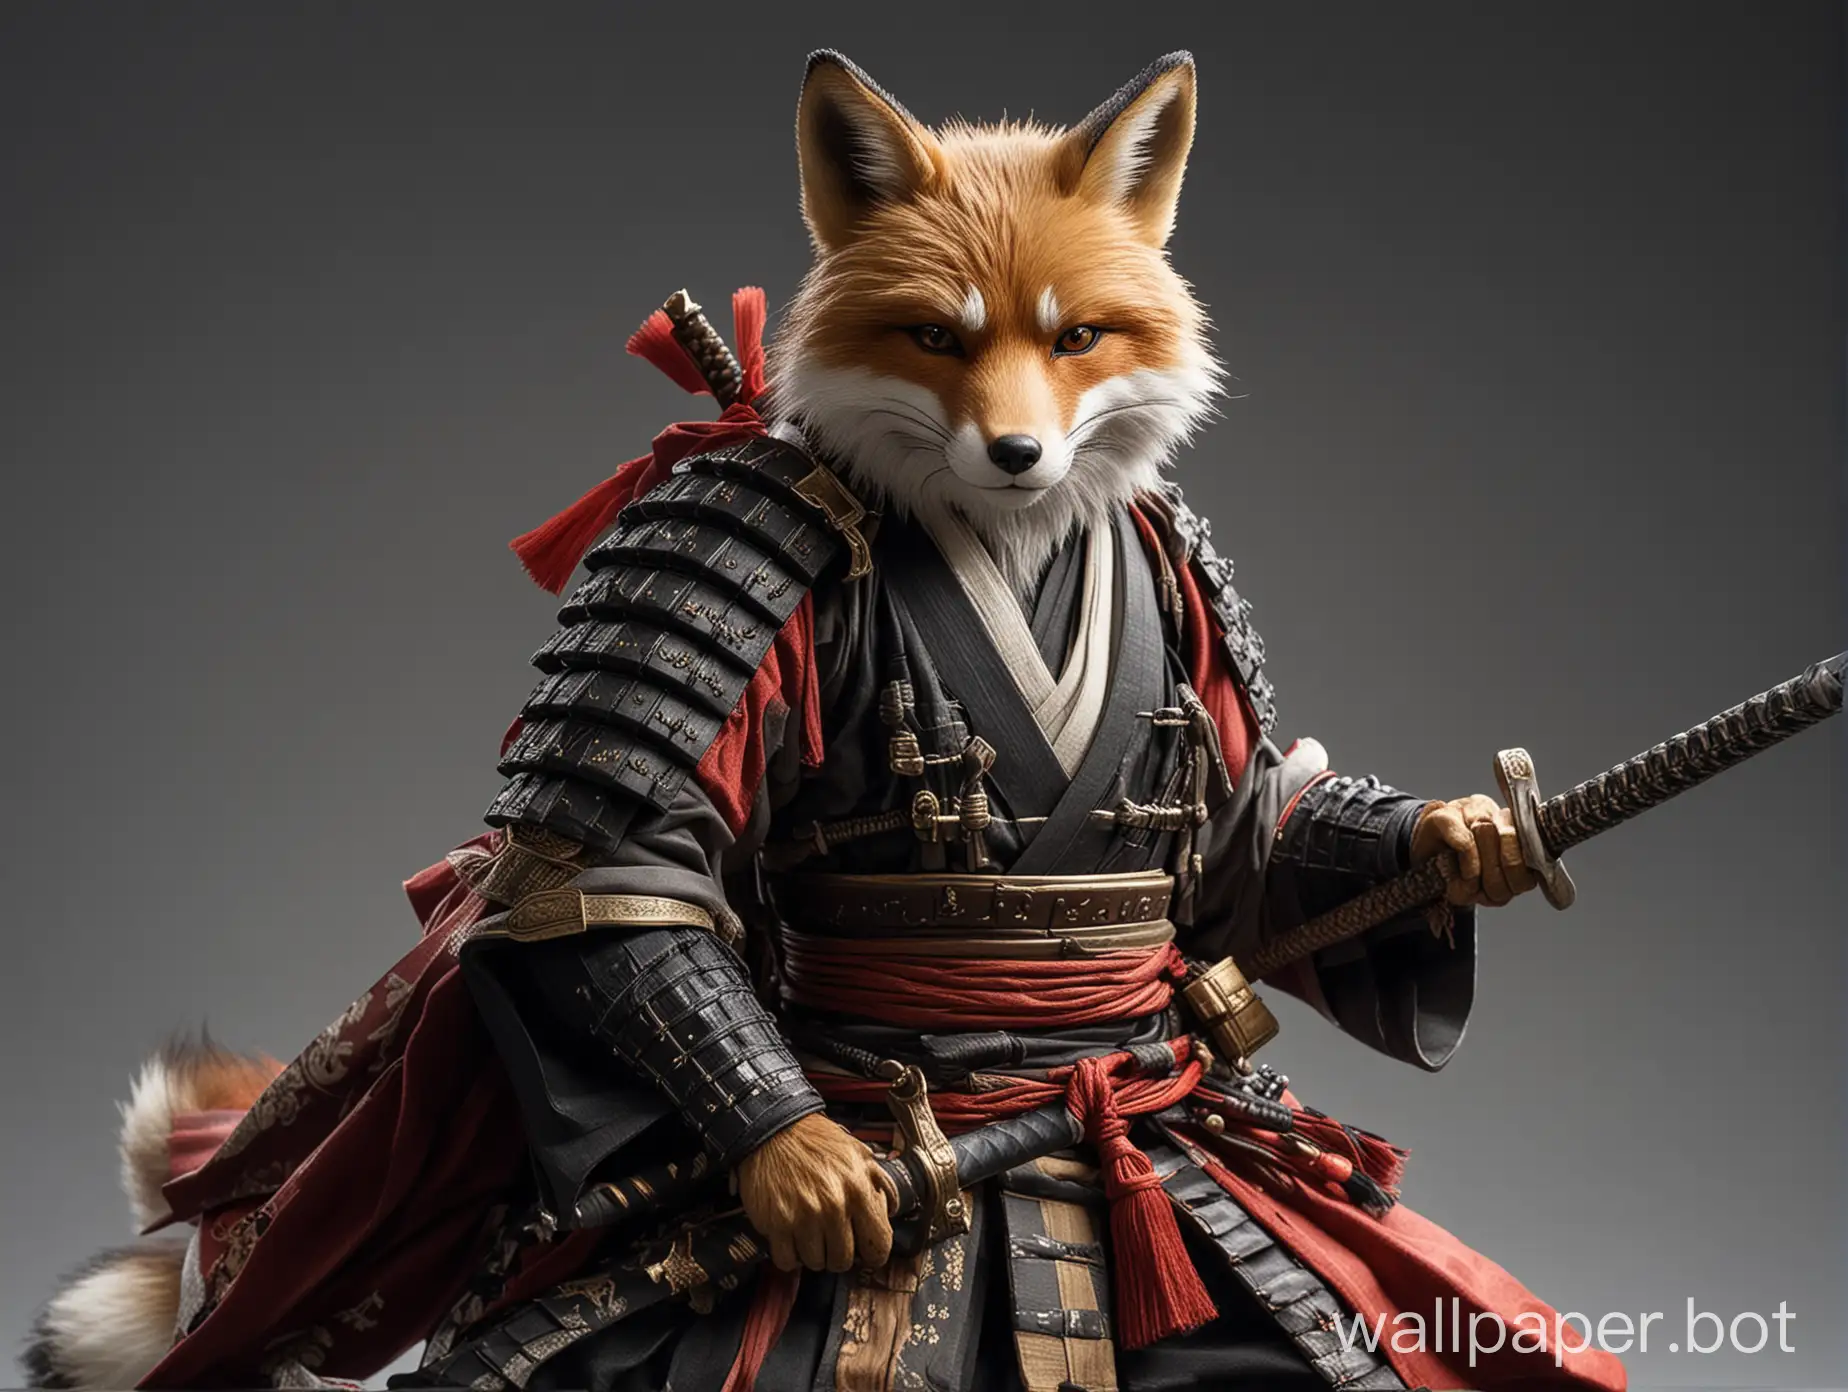 Samurai-Fox-in-Traditional-Armor-Ready-to-Strike-with-Sword